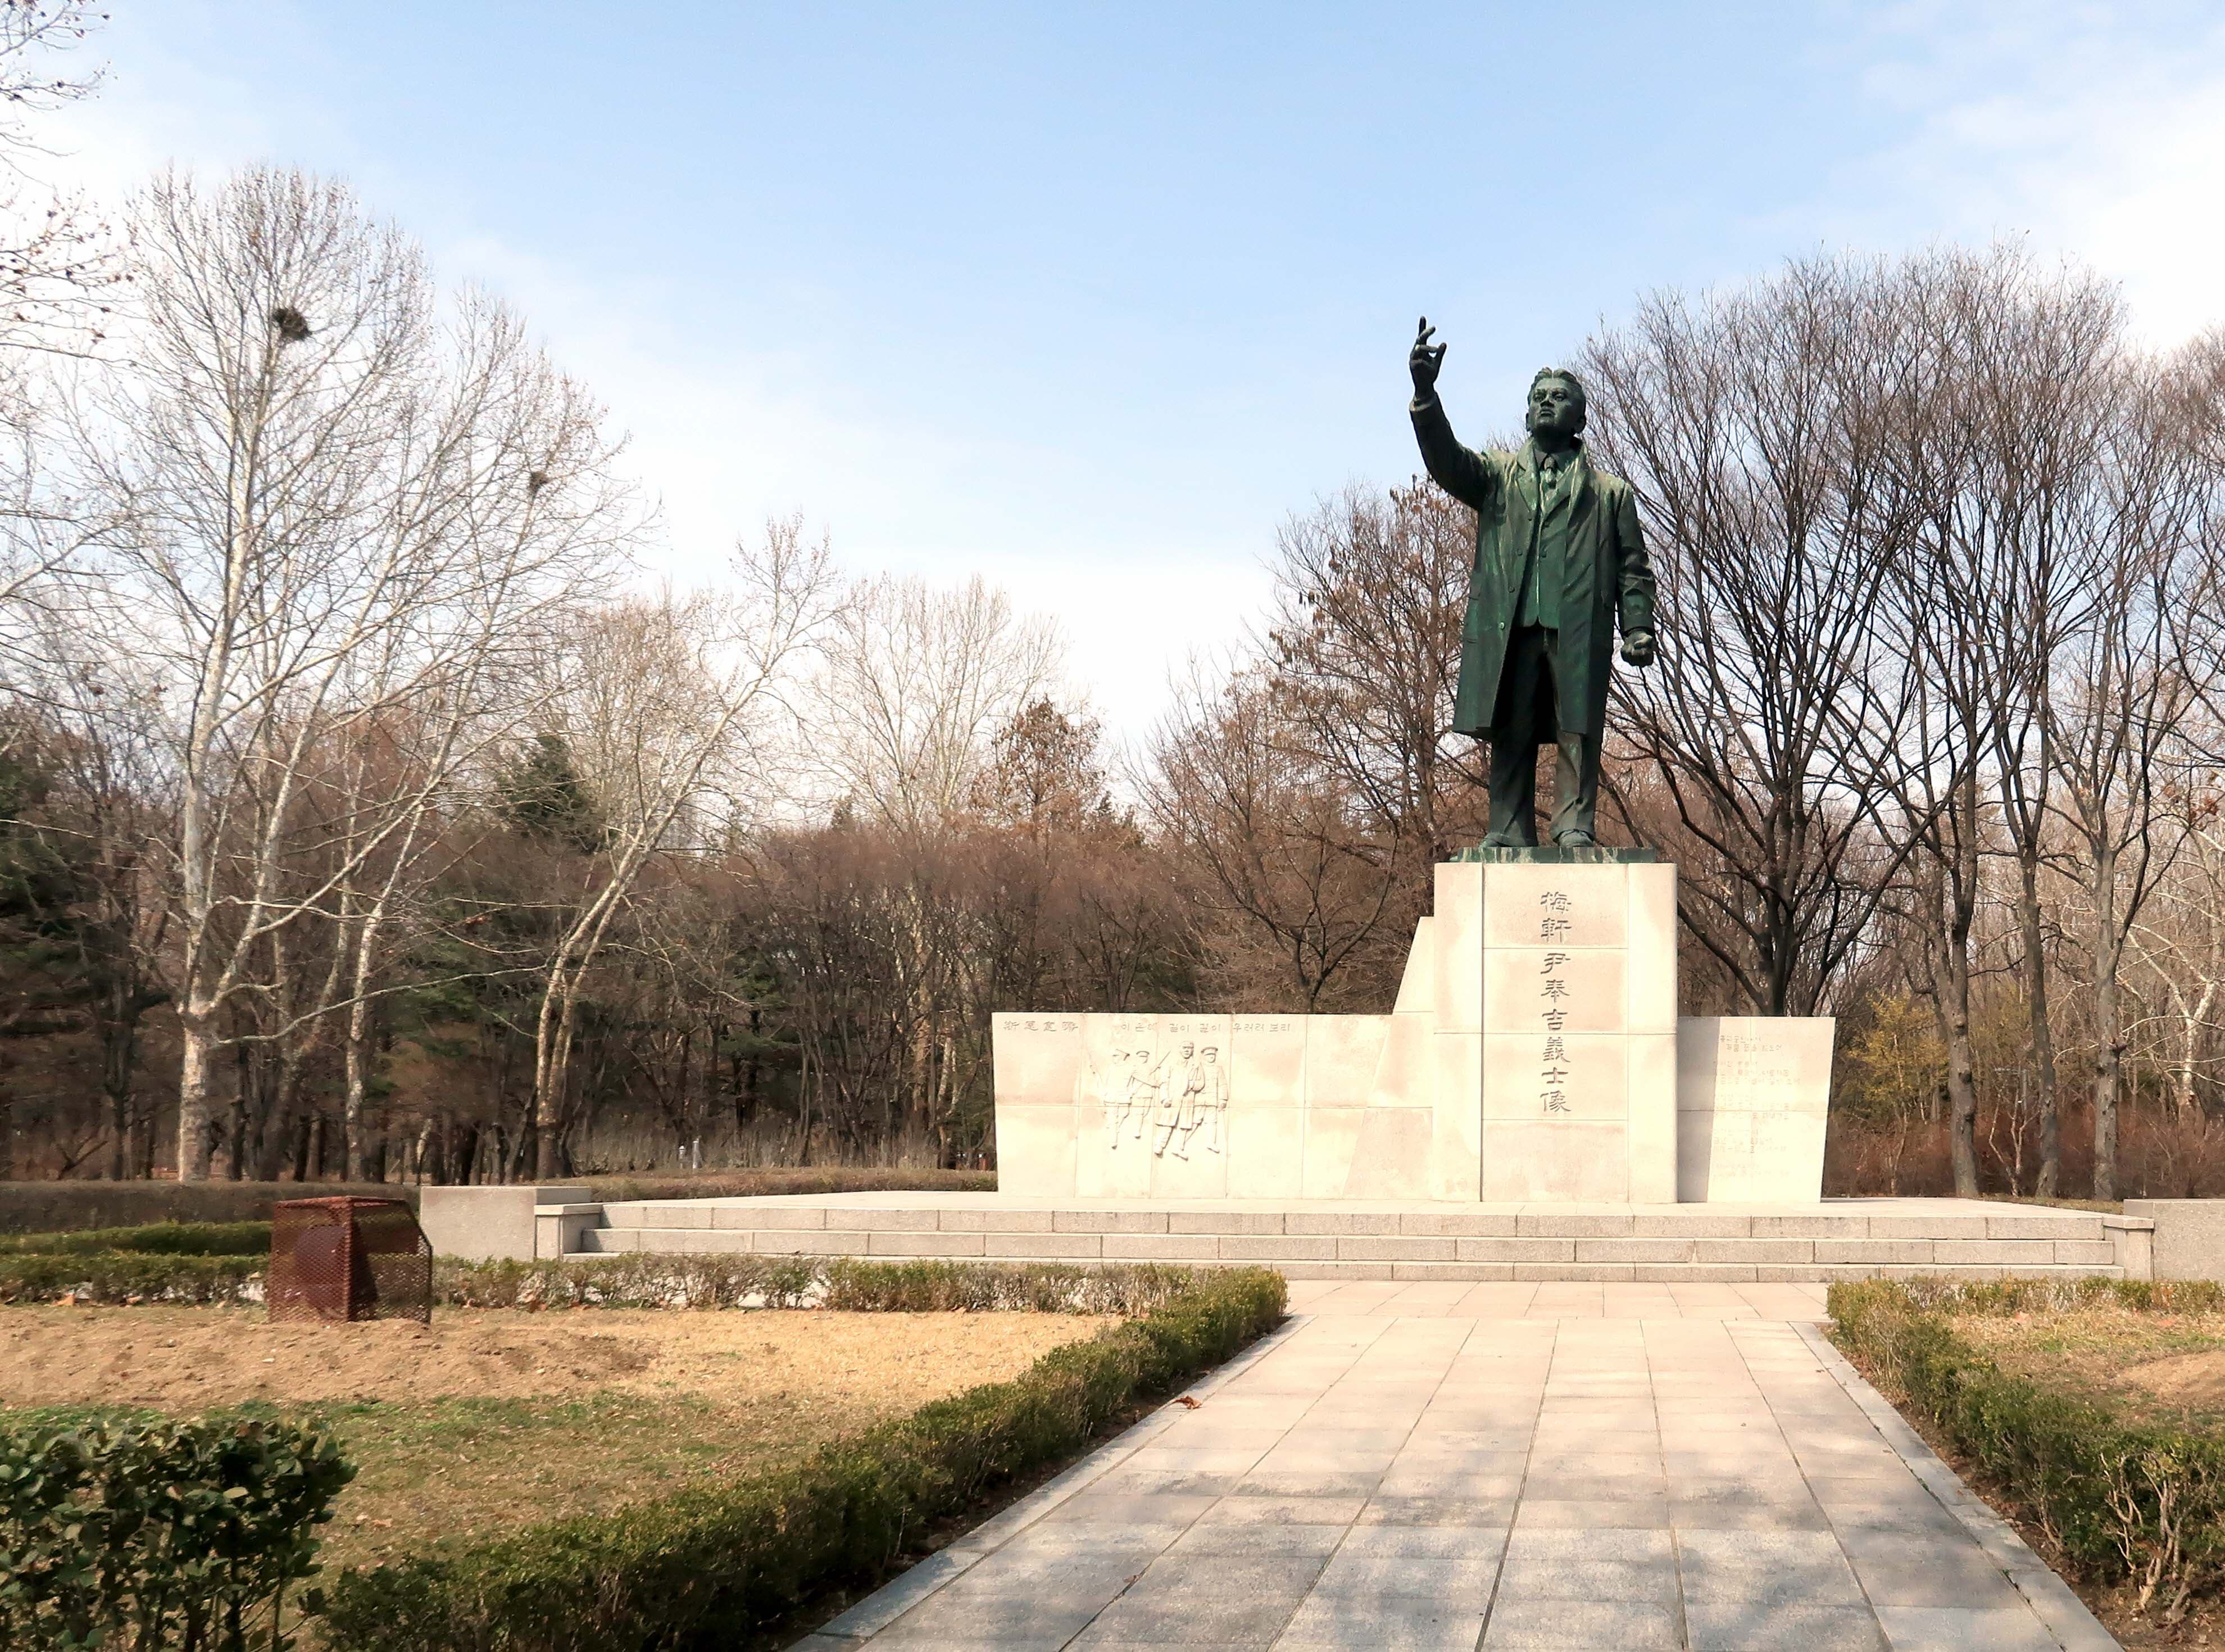 Maeheon Citizen's Forest (Yangjae Citizens' Forest)2 : A statue of Maeheon Yun Bong-gil stretching his arms with the autumn trees in the background